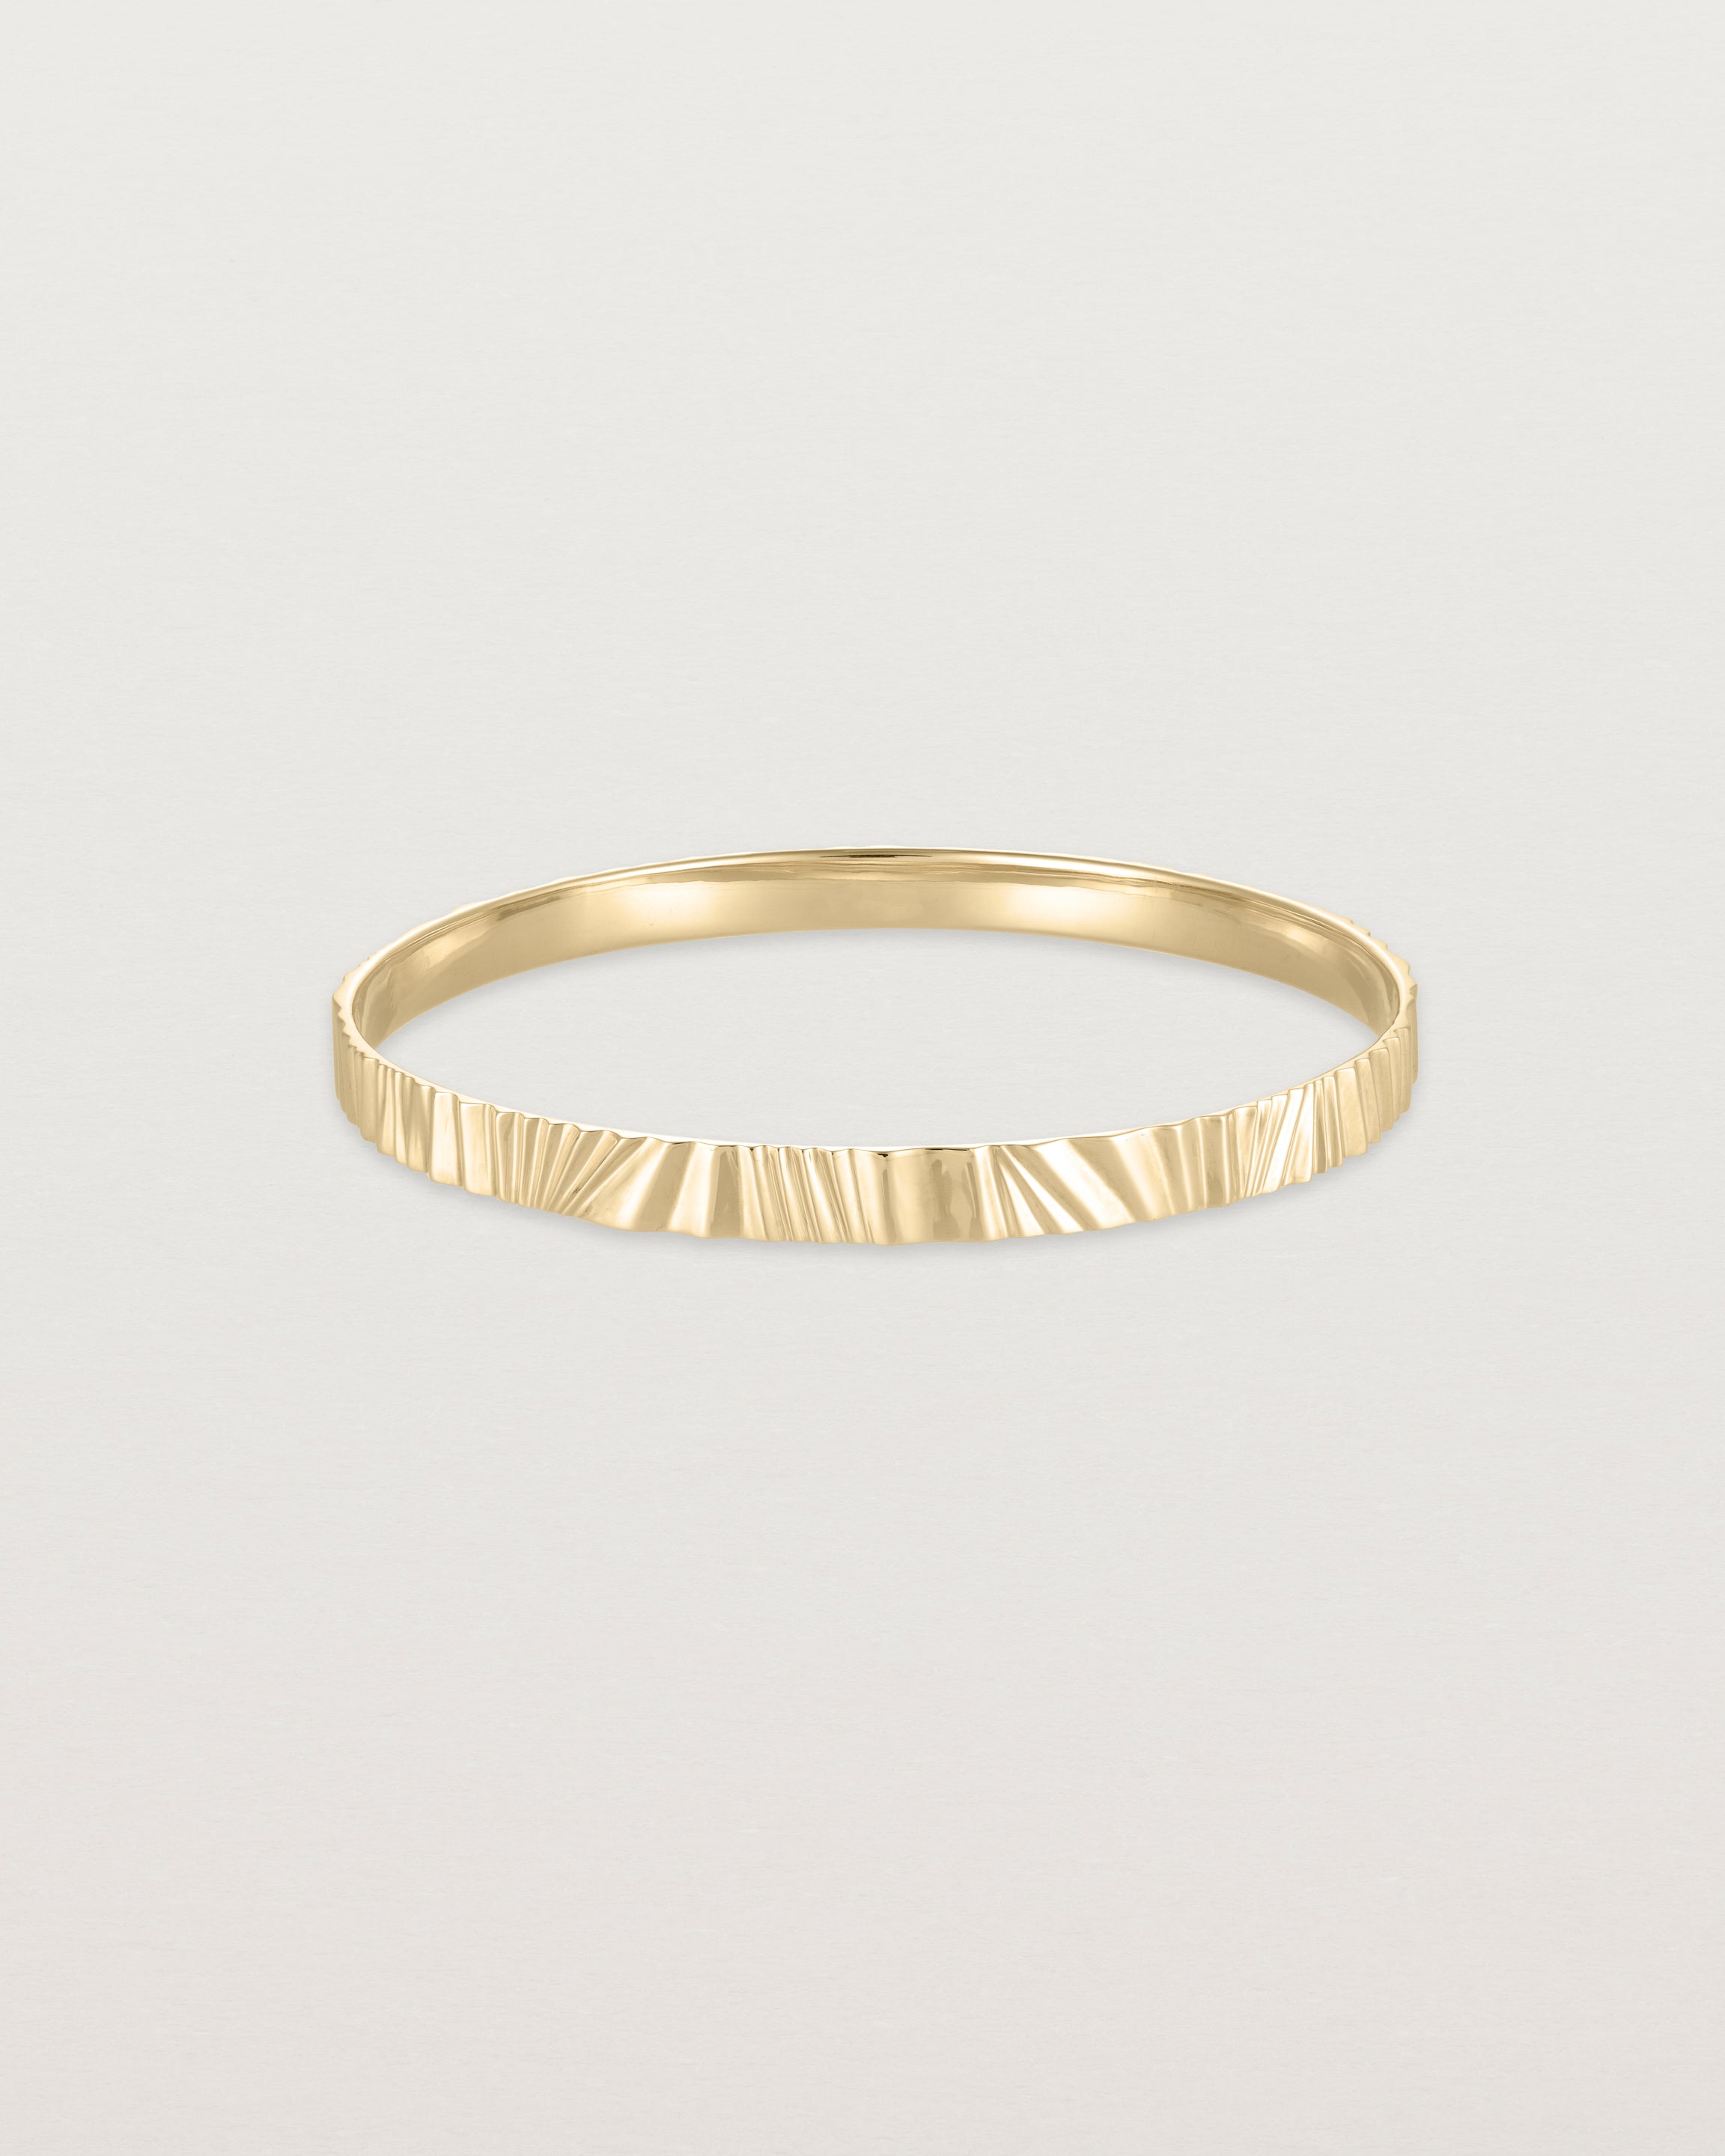 Front view of the Pan Bangle in yellow gold.